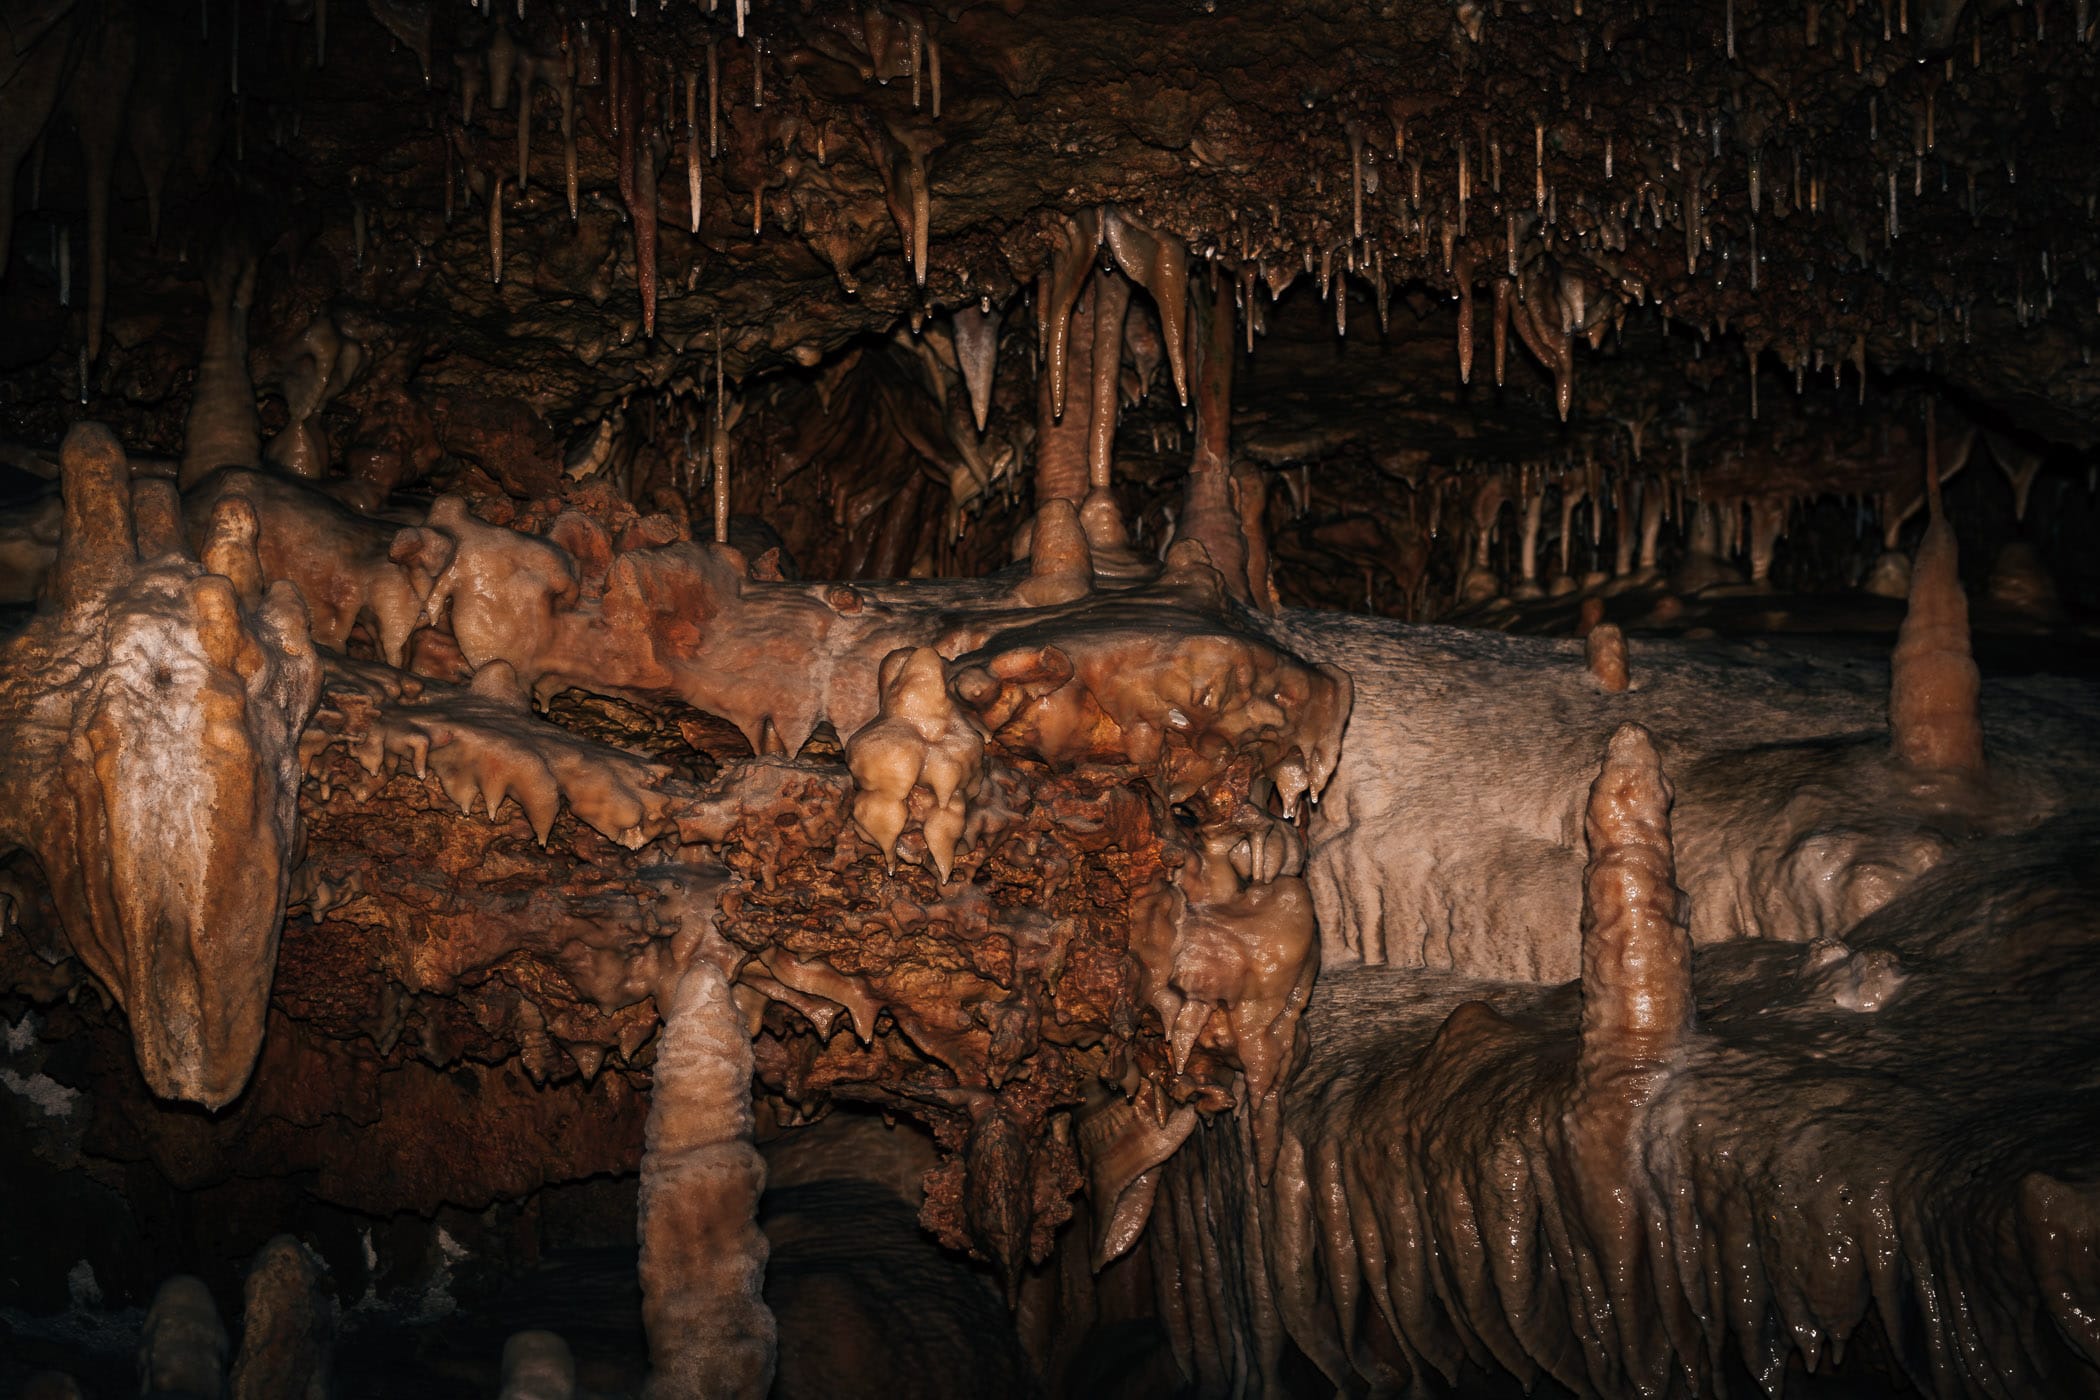 Rock formations at Texas' Inner Space Cavern evoke the fantastical art of H.R. Giger.